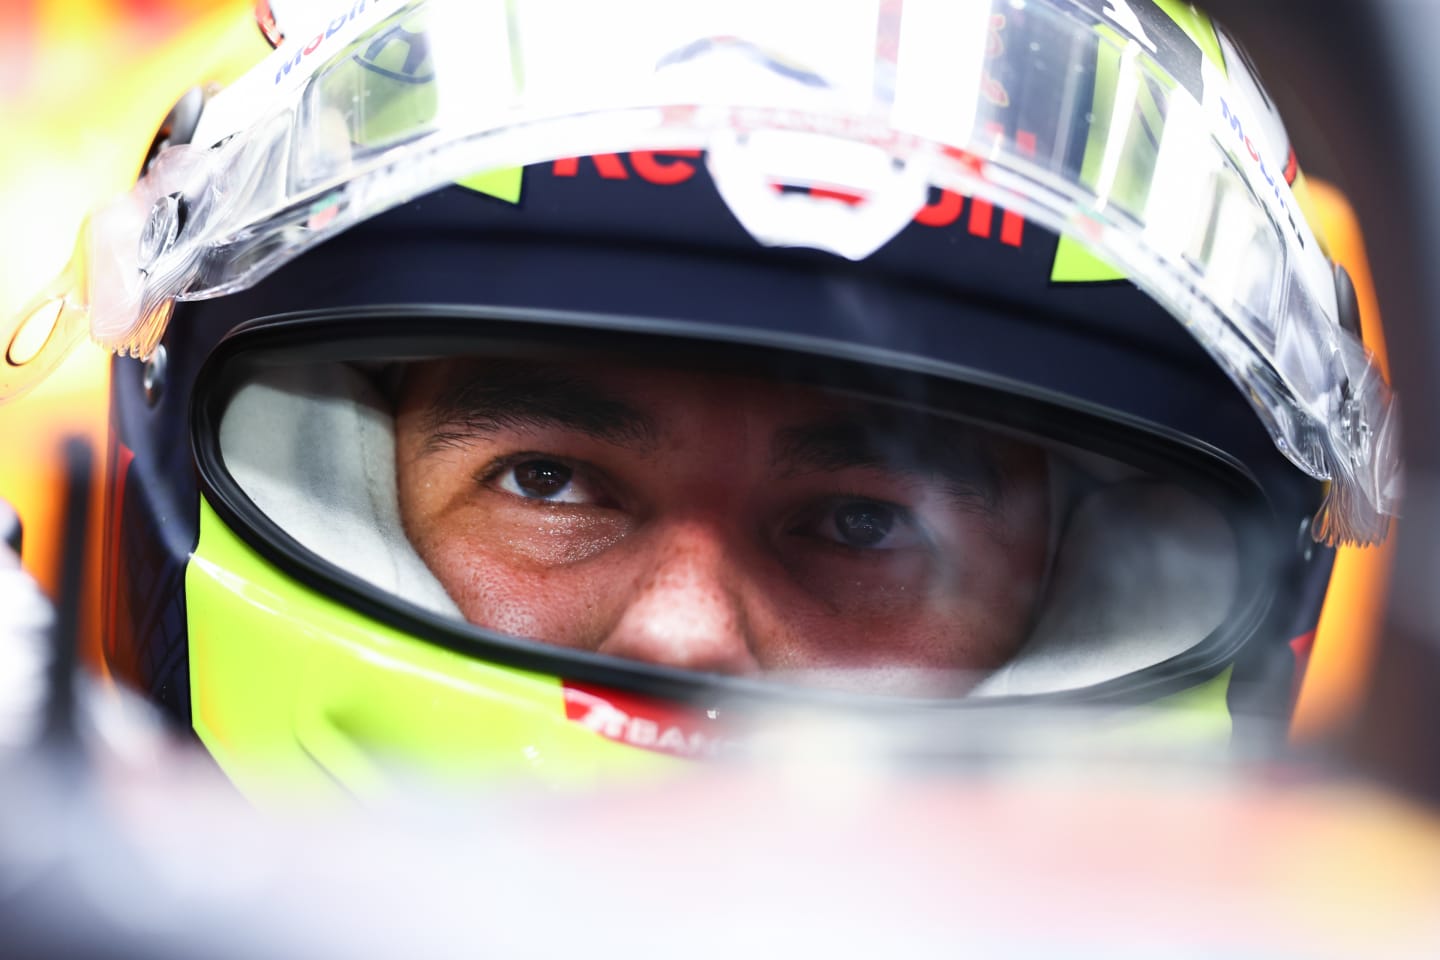 JEDDAH, SAUDI ARABIA - DECEMBER 04: Sergio Perez of Mexico and Red Bull Racing prepares to drive in the garage during qualifying ahead of the F1 Grand Prix of Saudi Arabia at Jeddah Corniche Circuit on December 04, 2021 in Jeddah, Saudi Arabia. (Photo by Mark Thompson/Getty Images)